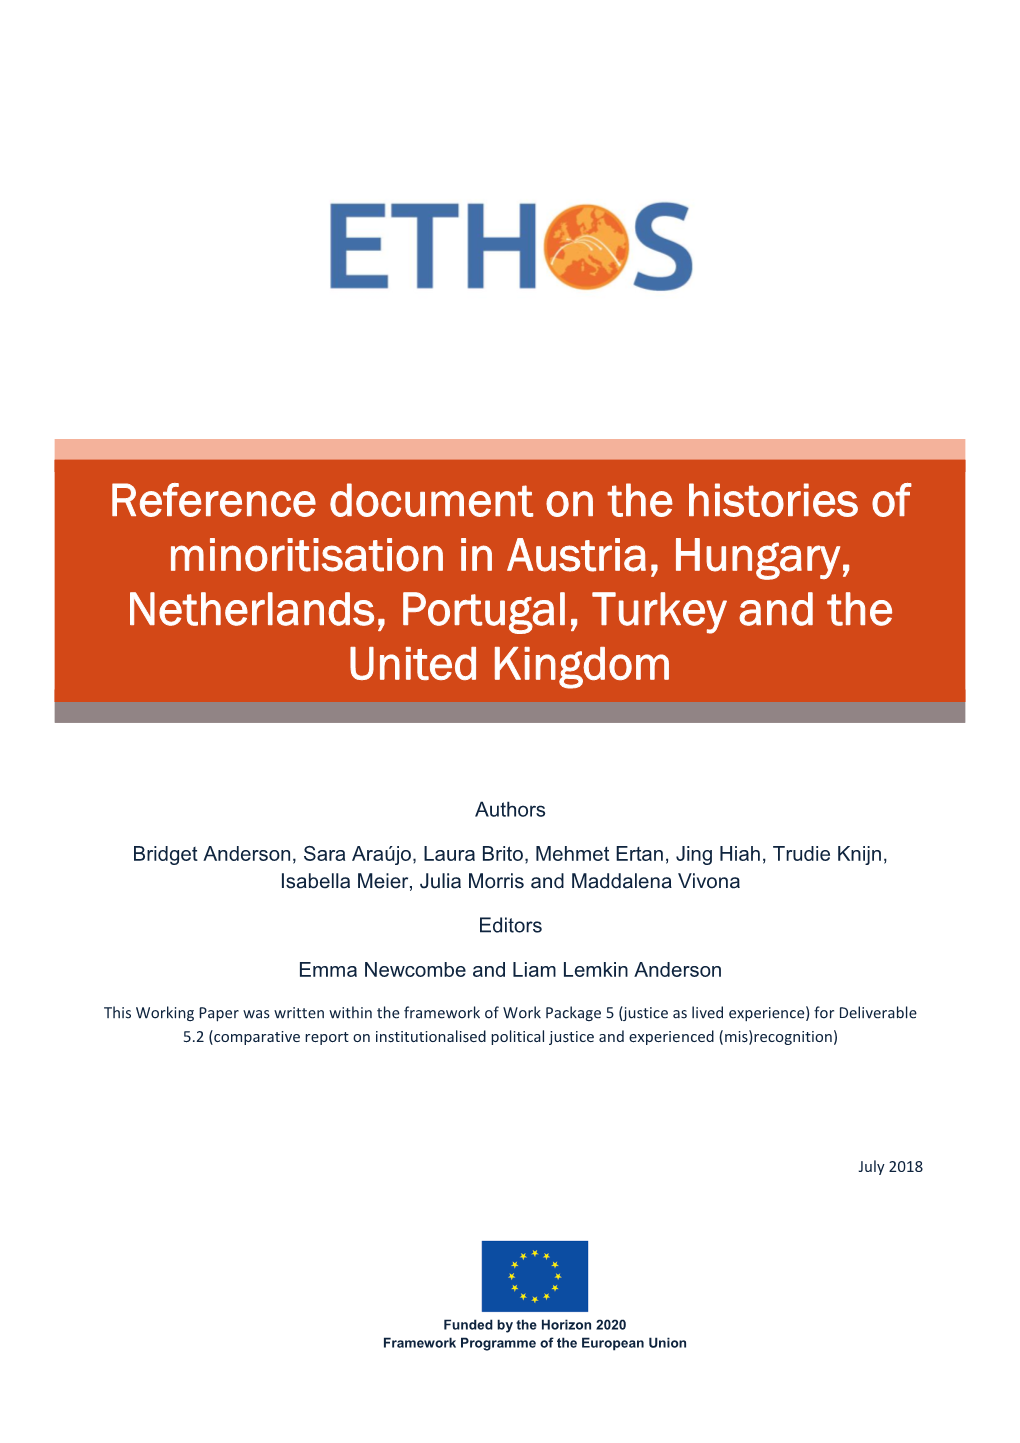 Reference Document on the Histories of Minoritisation in Austria, Hungary, Netherlands, Portugal, Turkey and The